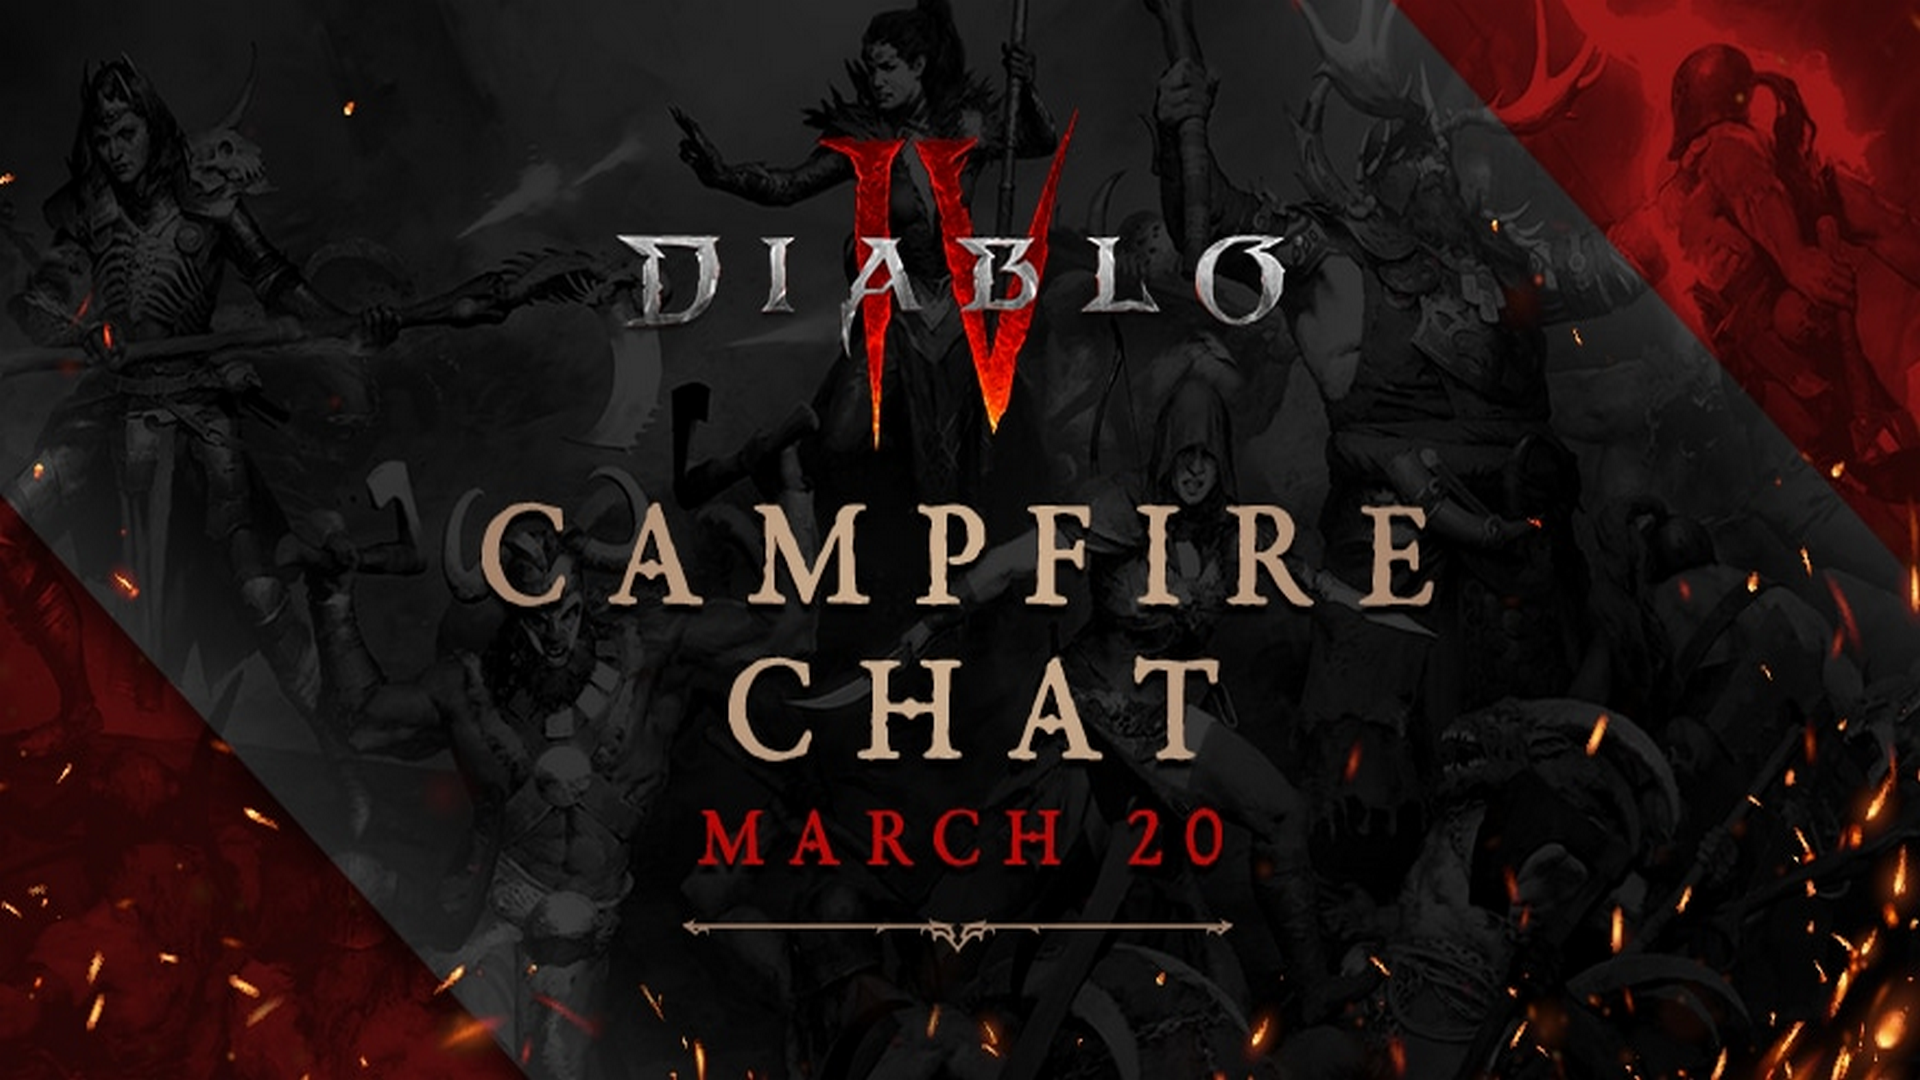 Diablo IV Reveals Next Season Updates and More Info On The First PTR In Campfire Chat